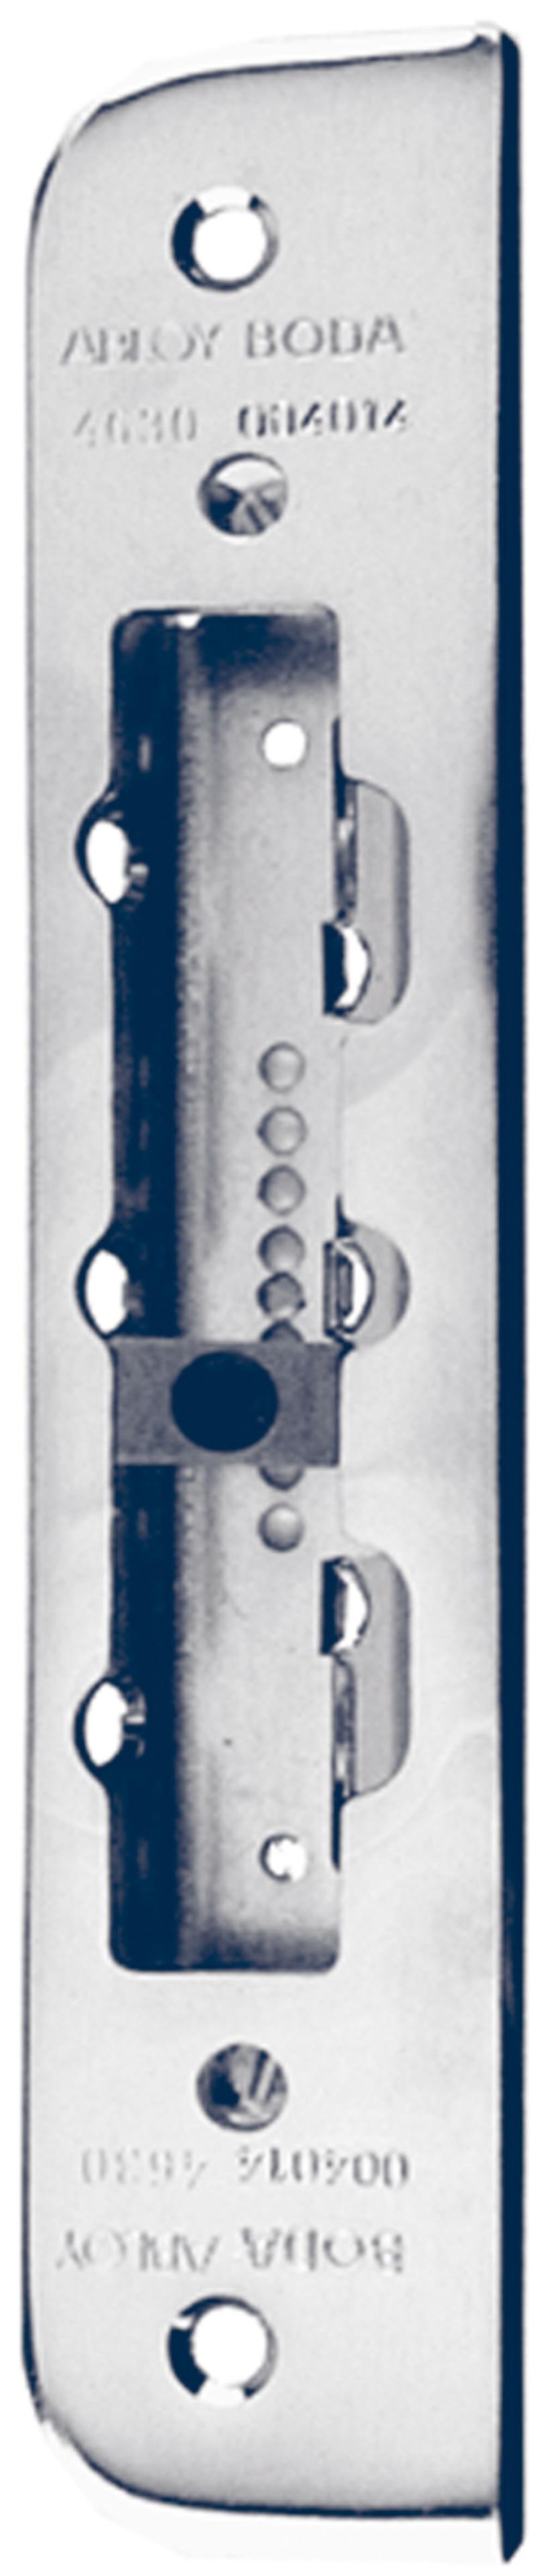 Abloy end plate 4630 (Boda) (982002)